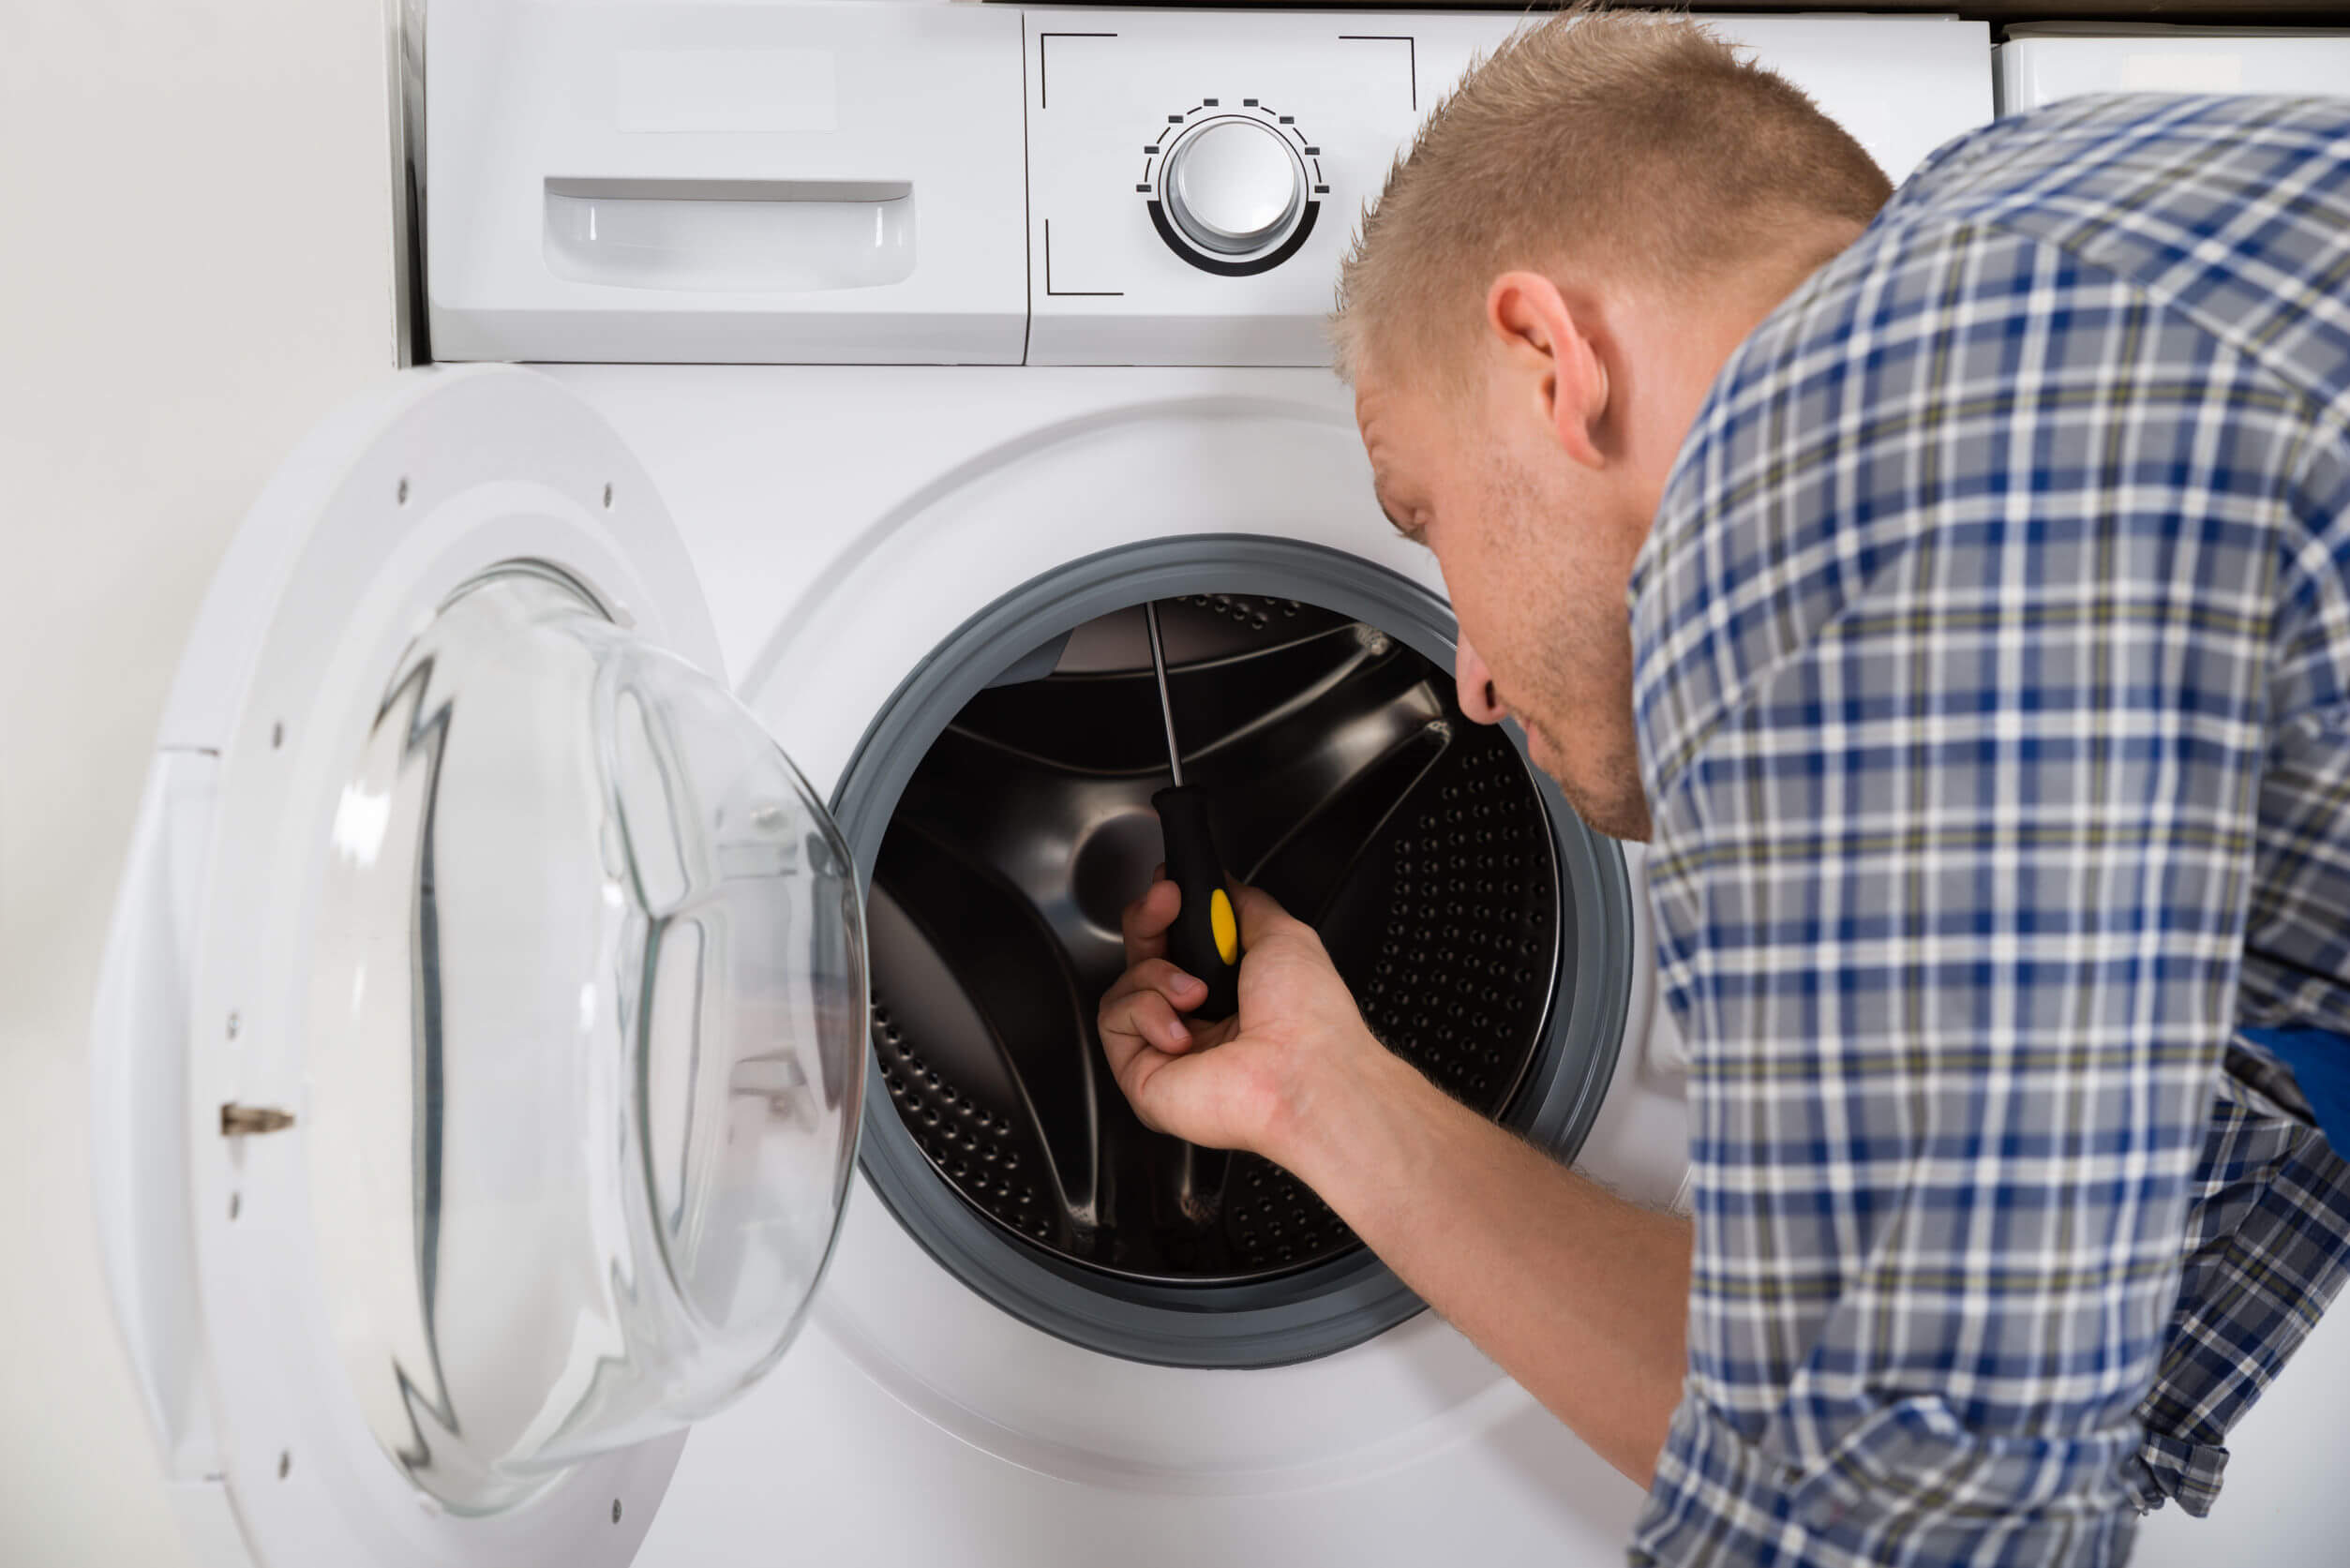 WHAT TO DO IF A DRYER OVERHEATS AND SHUTS OFF?